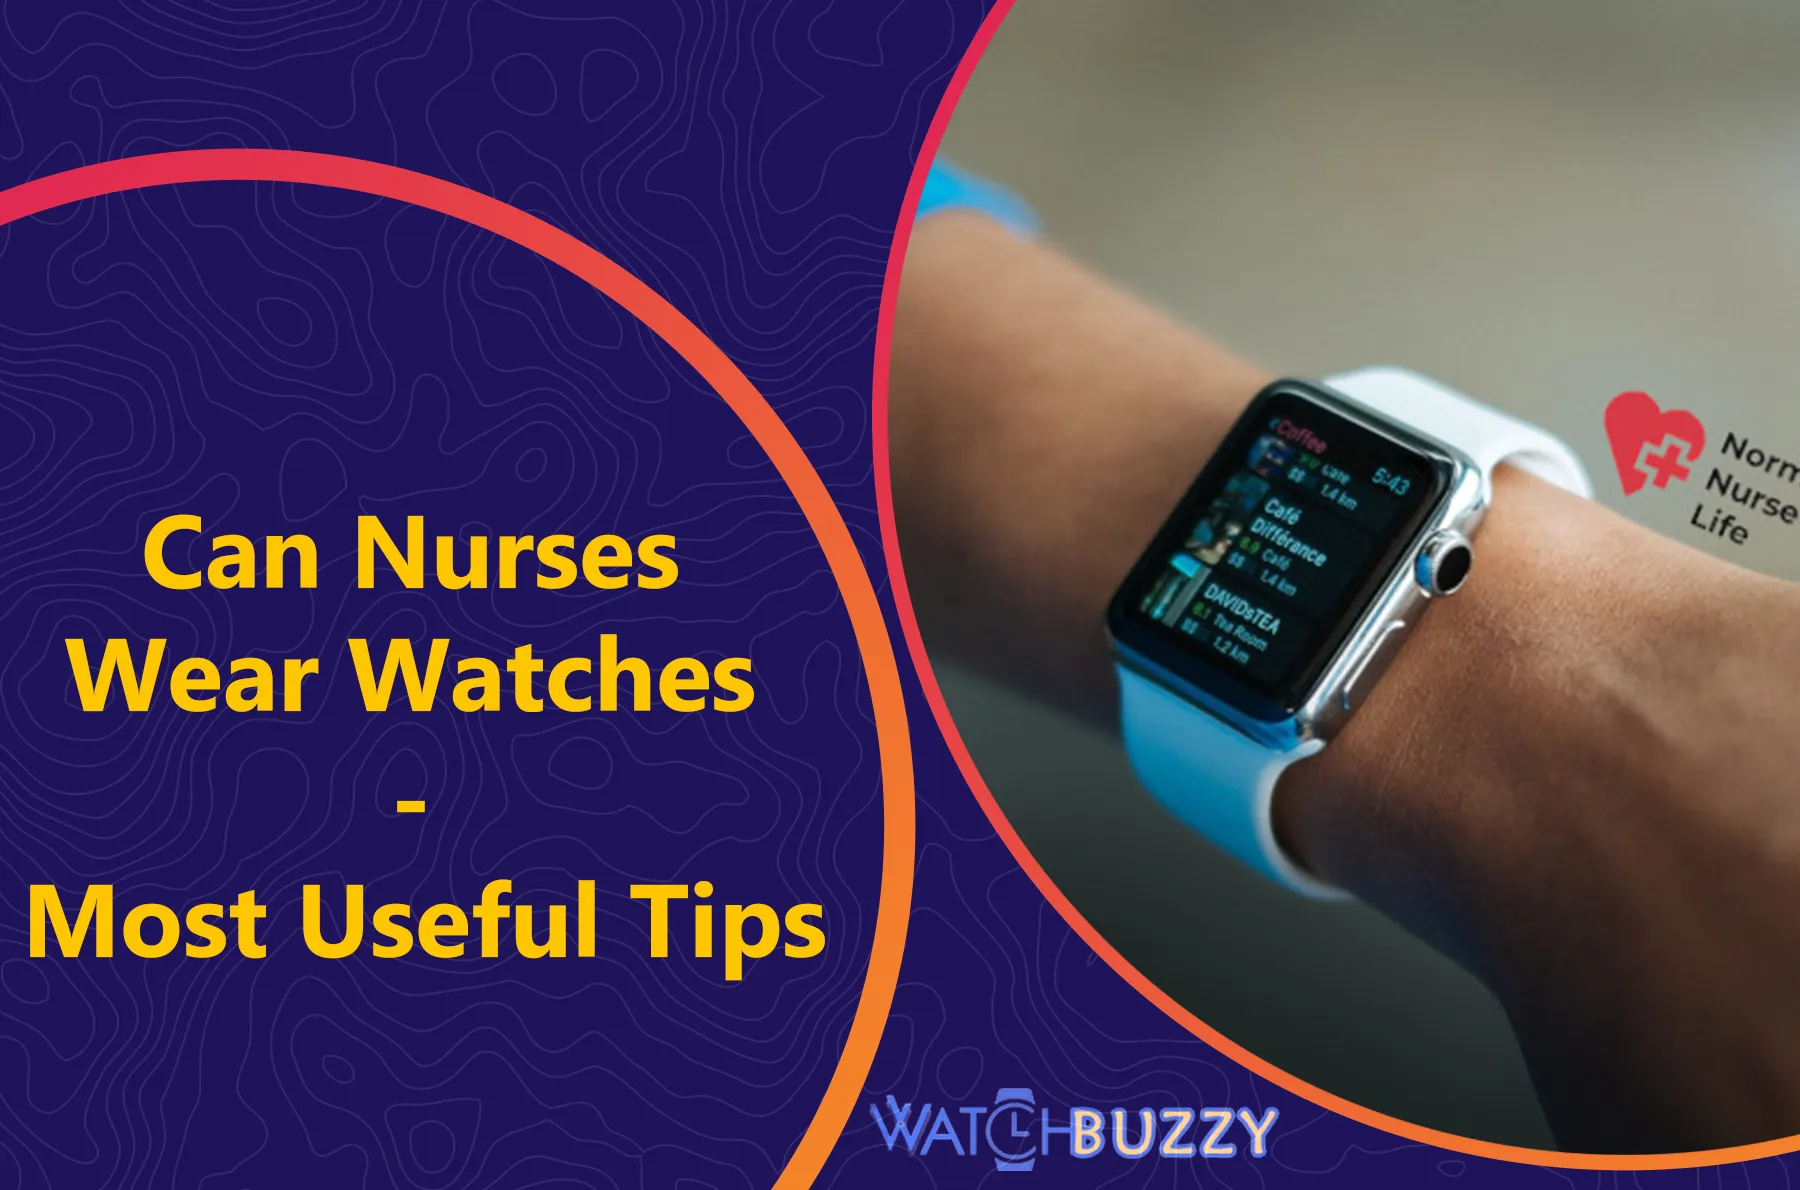 Can Nurses Wear Watches - Most Useful Tips